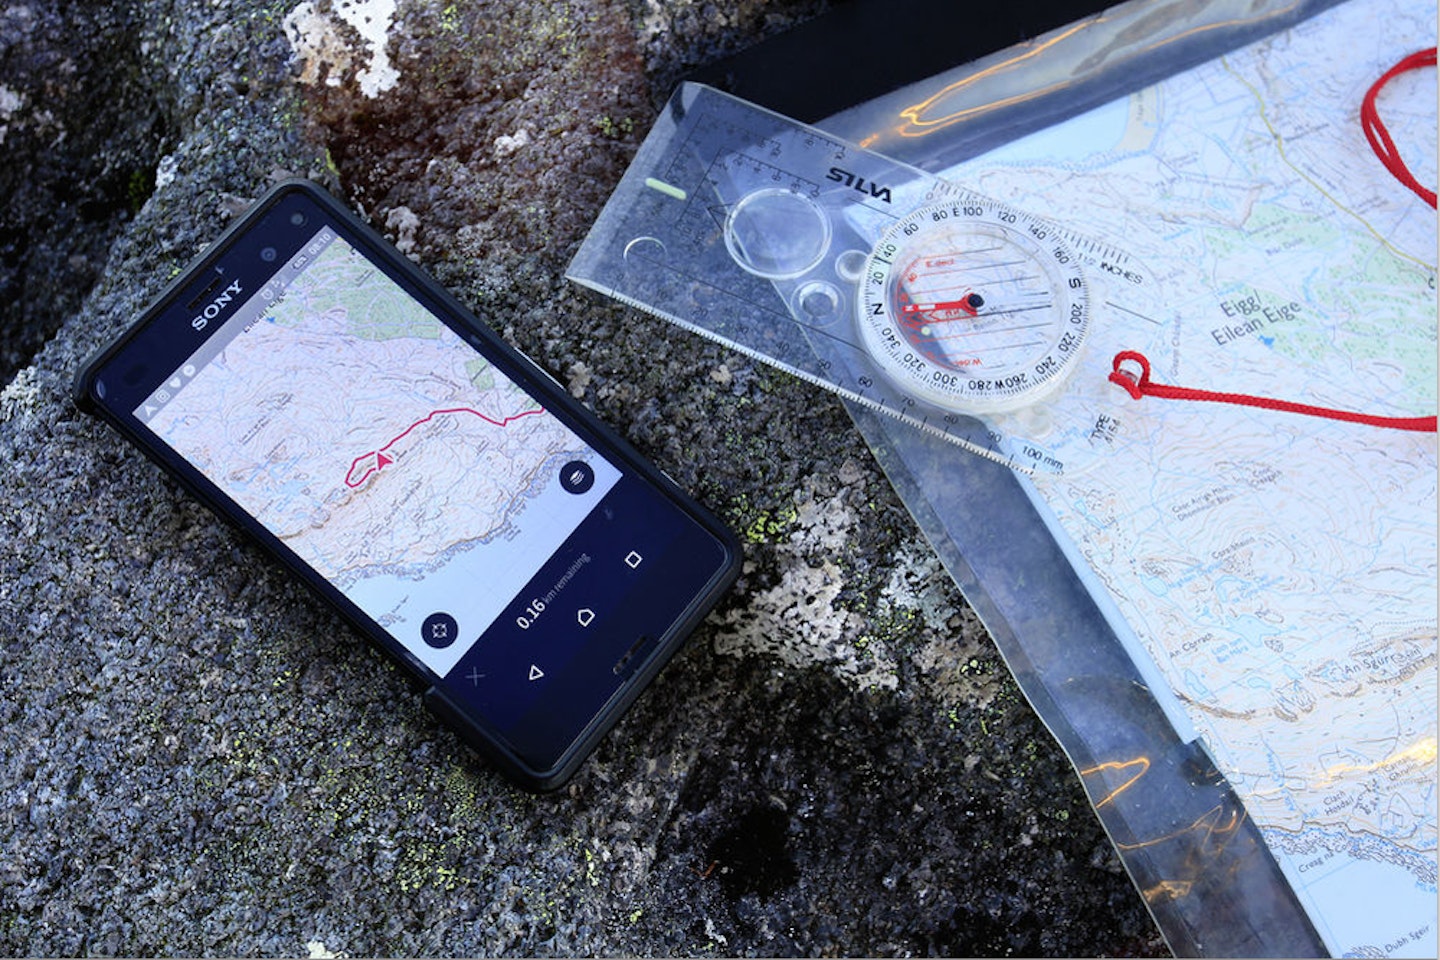 HOW TO ACCESS HALF-PRICE OS MAPS IF YOU ARE A TRAIL OR COUNTRY WALKING MAGAZINE SUBSCRIBER